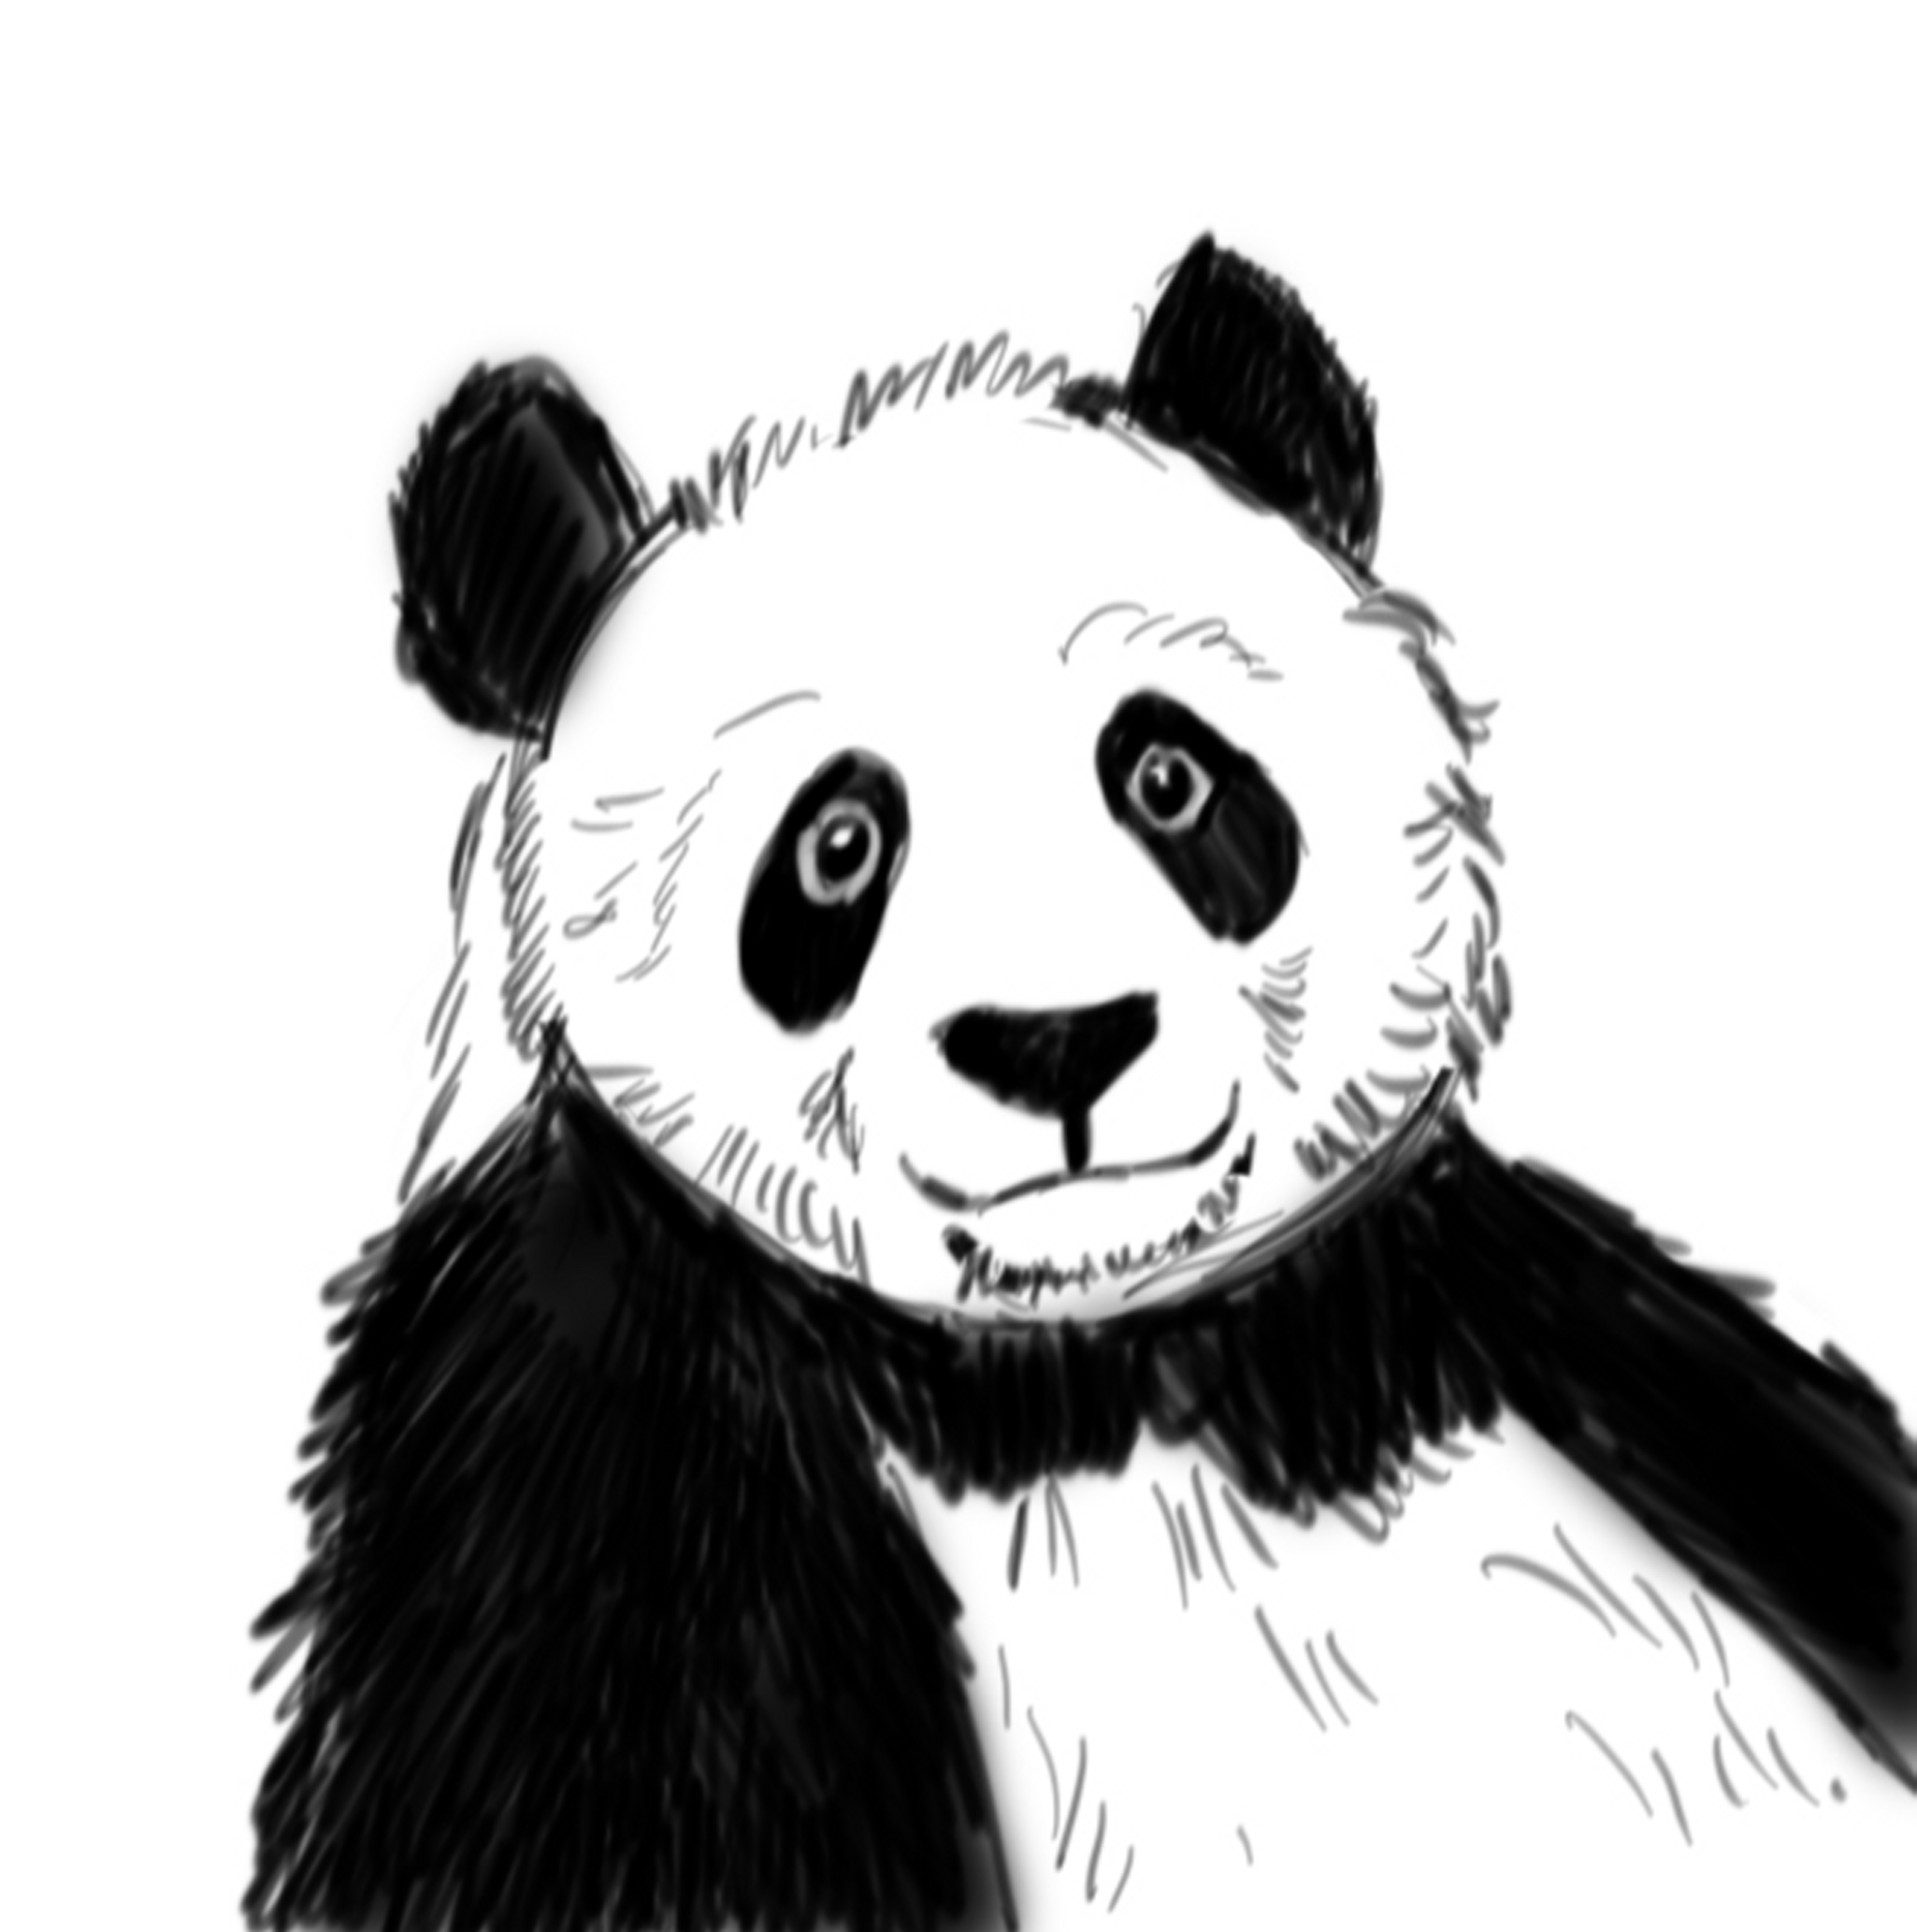 How to Draw a Panda I Panda in bamboo forest drawing tutorial - YouTube